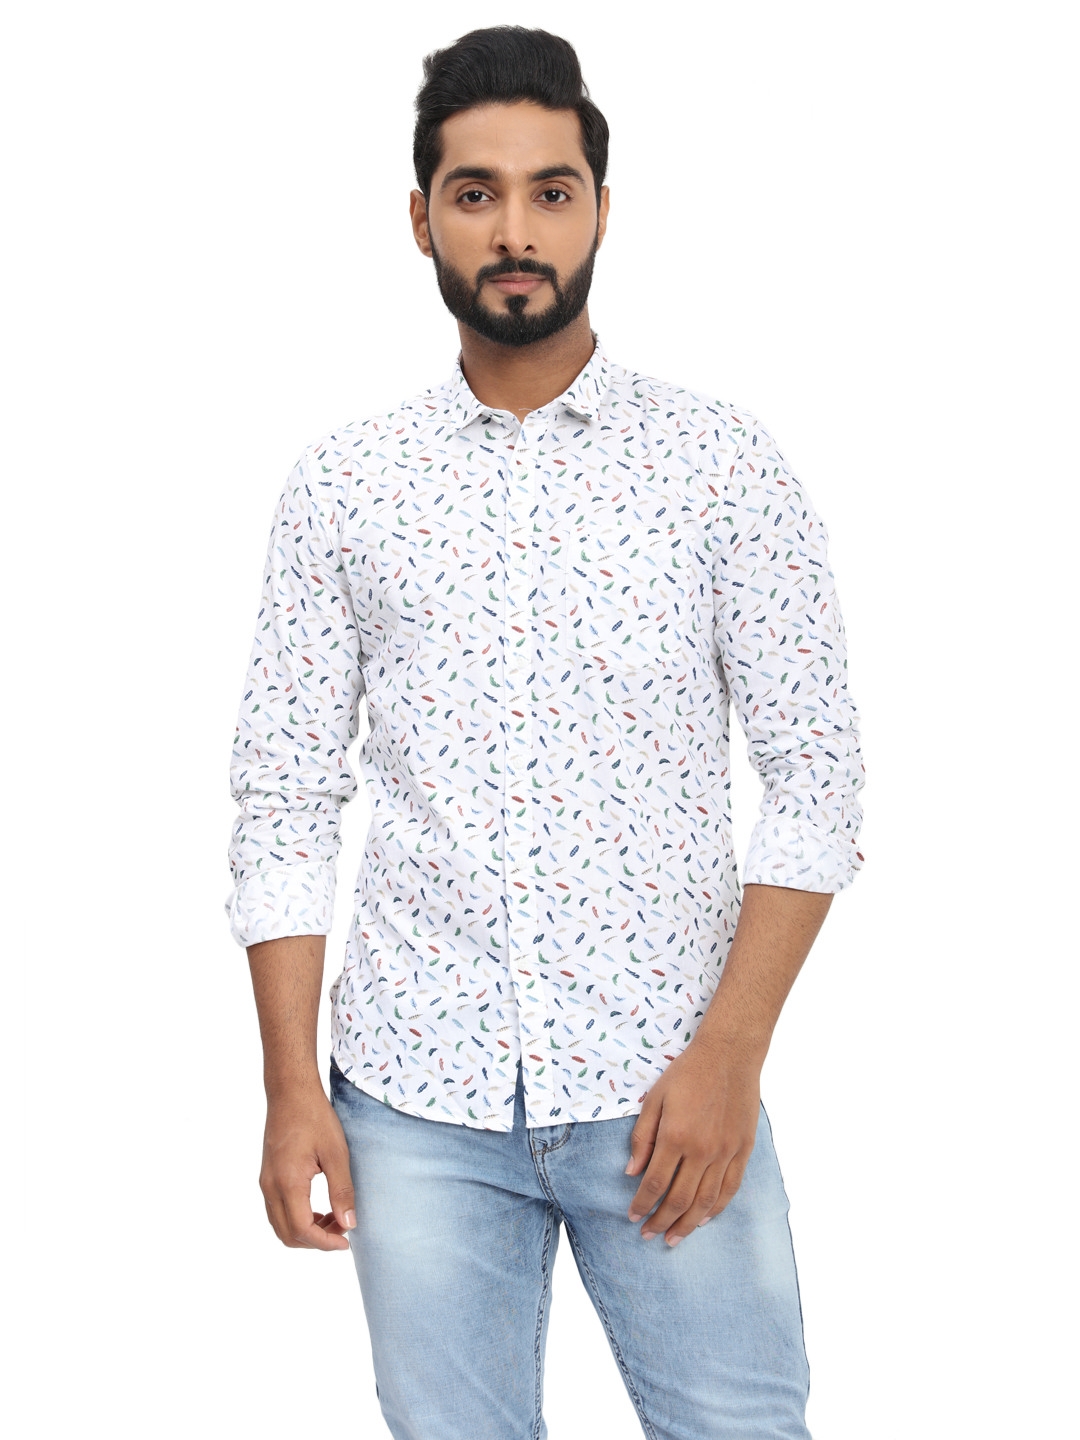 D'cot by Donear | D'cot by Donear Men's White Cotton Casual Shirts